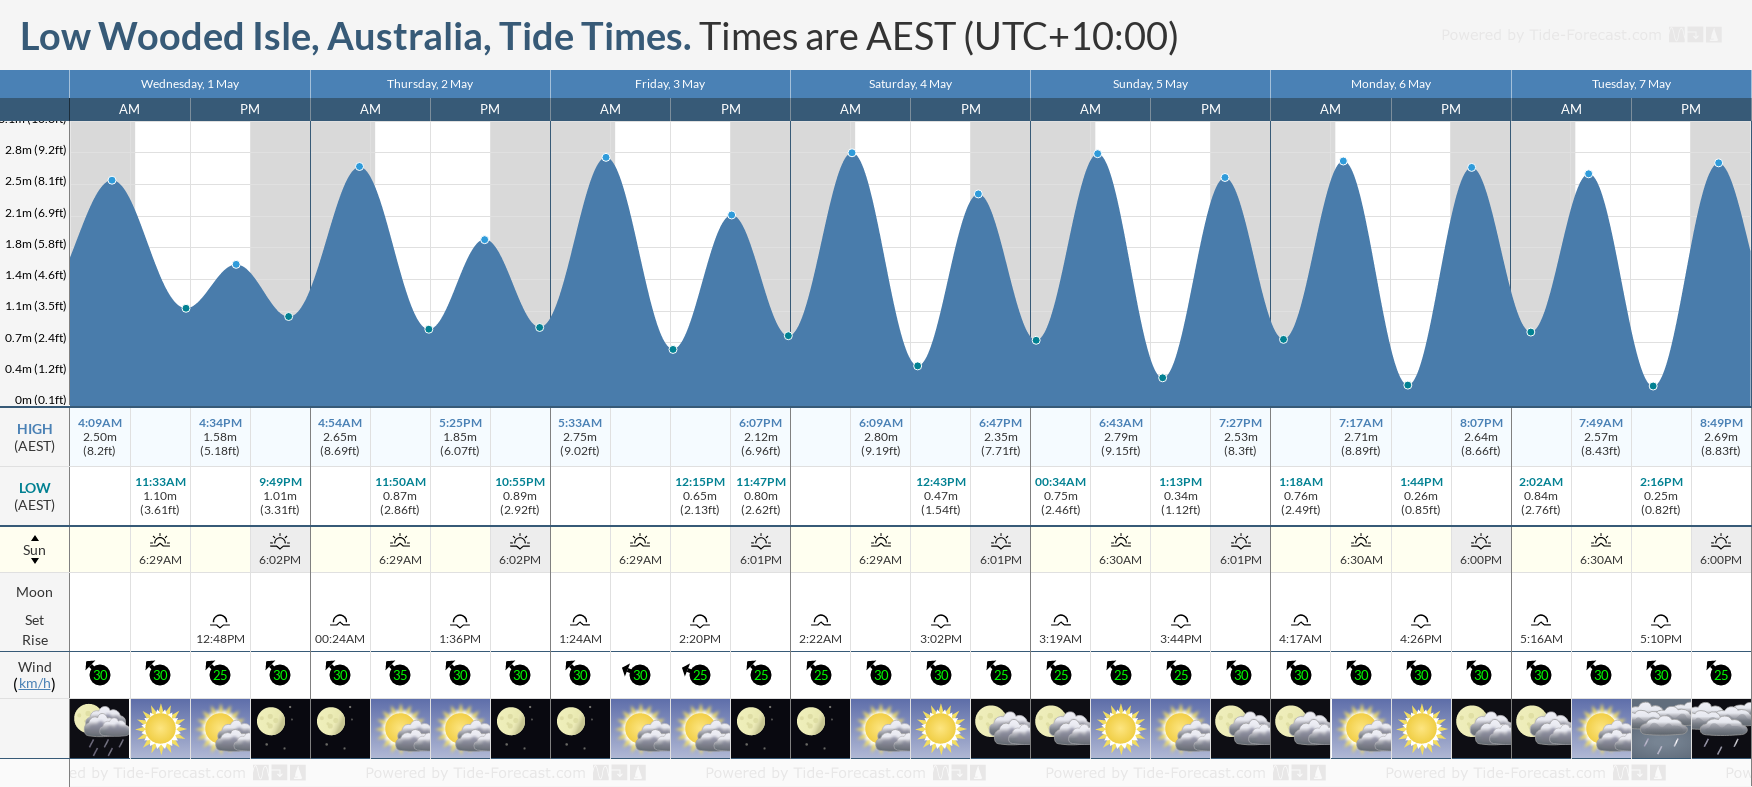 Low Wooded Isle, Australia Tide Chart including high and low tide tide times for the next 7 days